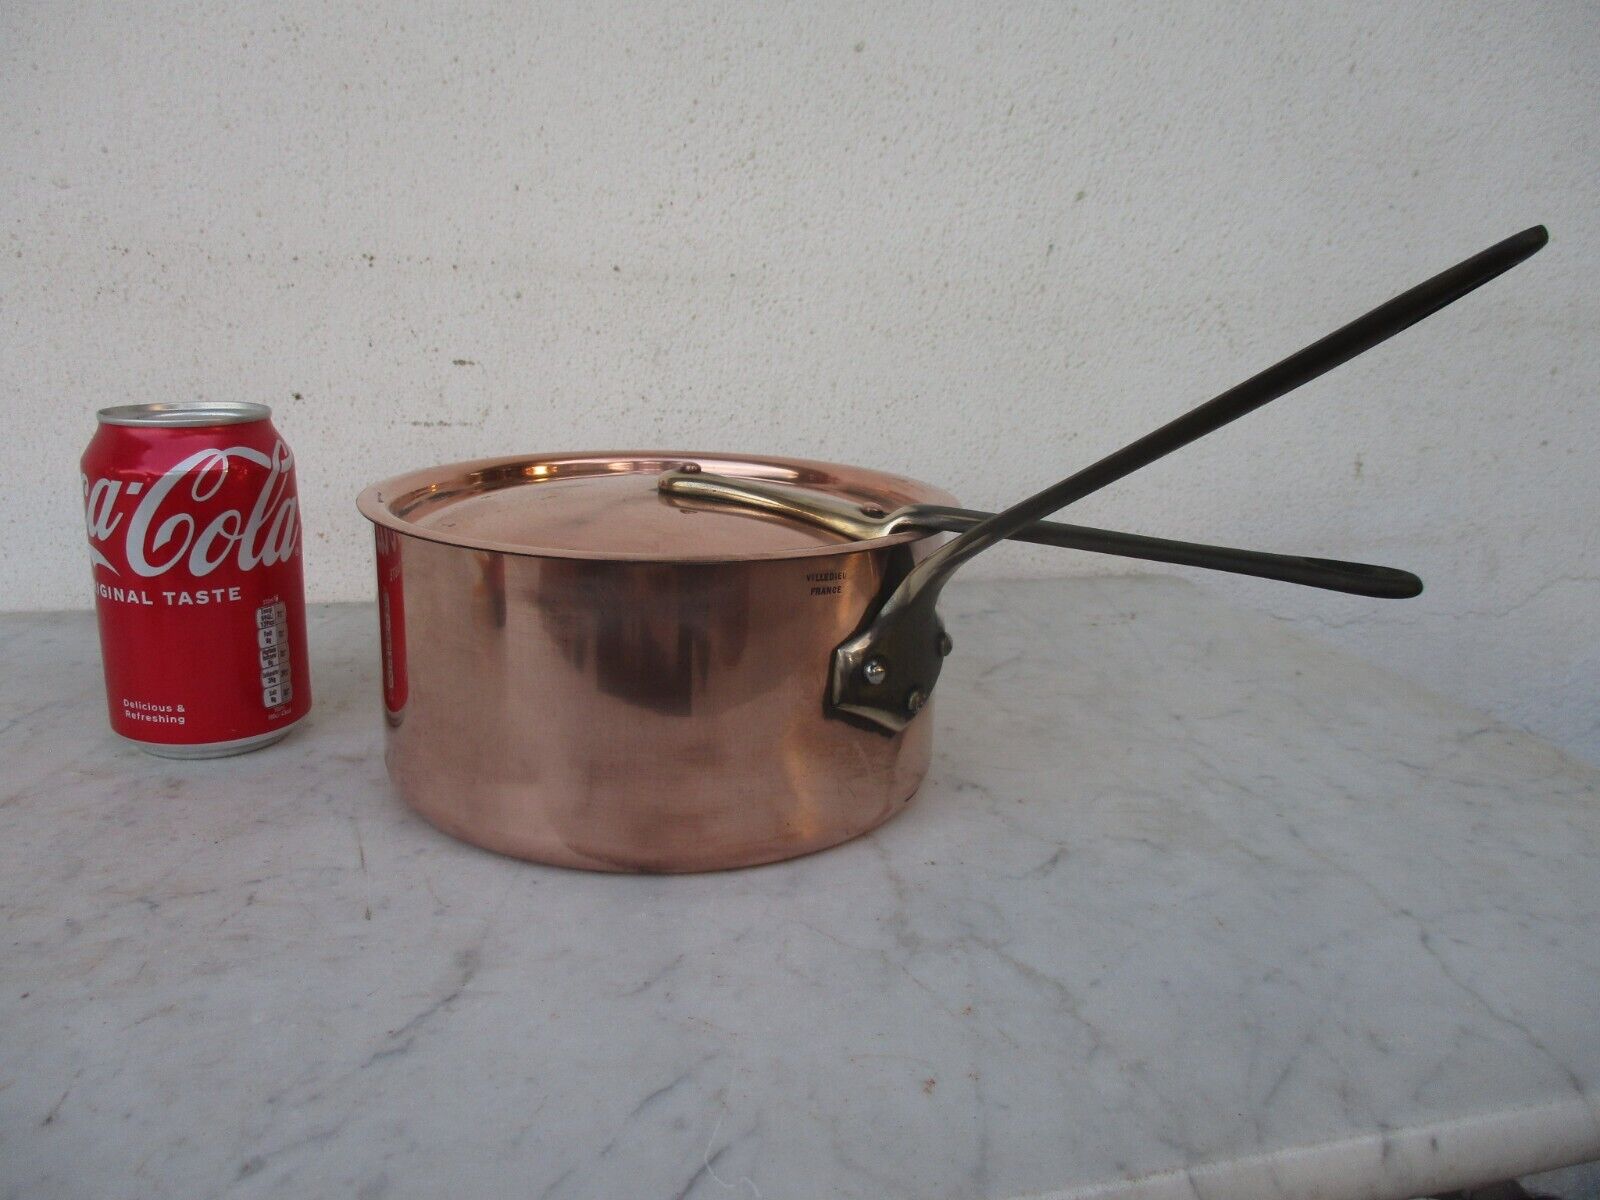 VINTAGE FRENCH COPPER SAUCEPAN WITH LID REPUTABLE VILLEDIEU CHEF COOKING POT